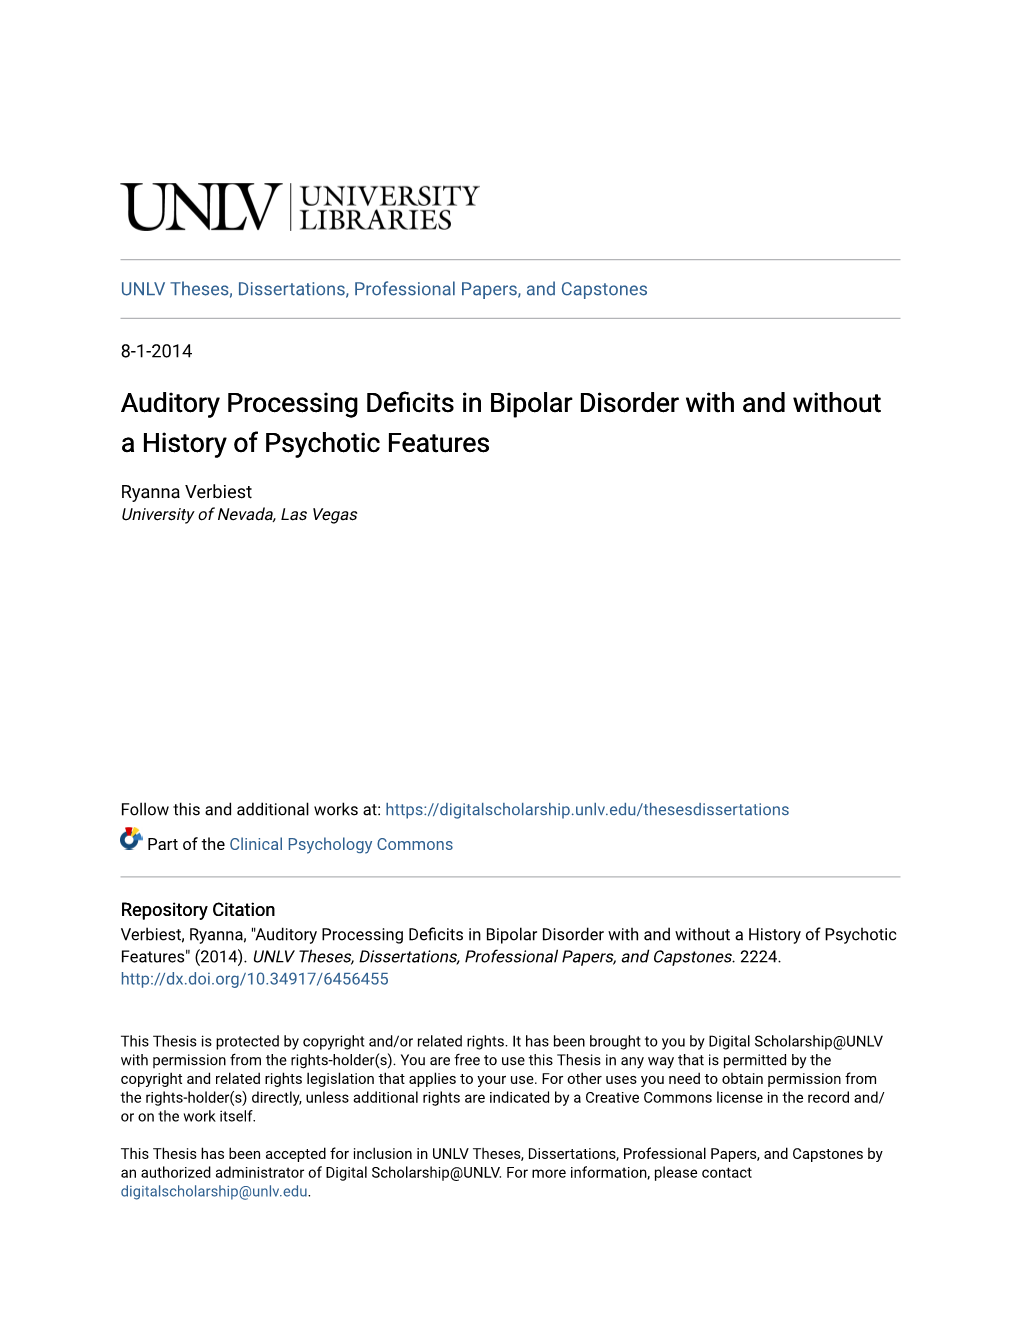 Auditory Processing Deficits in Bipolar Disorder with and Without a History of Psychotic Features